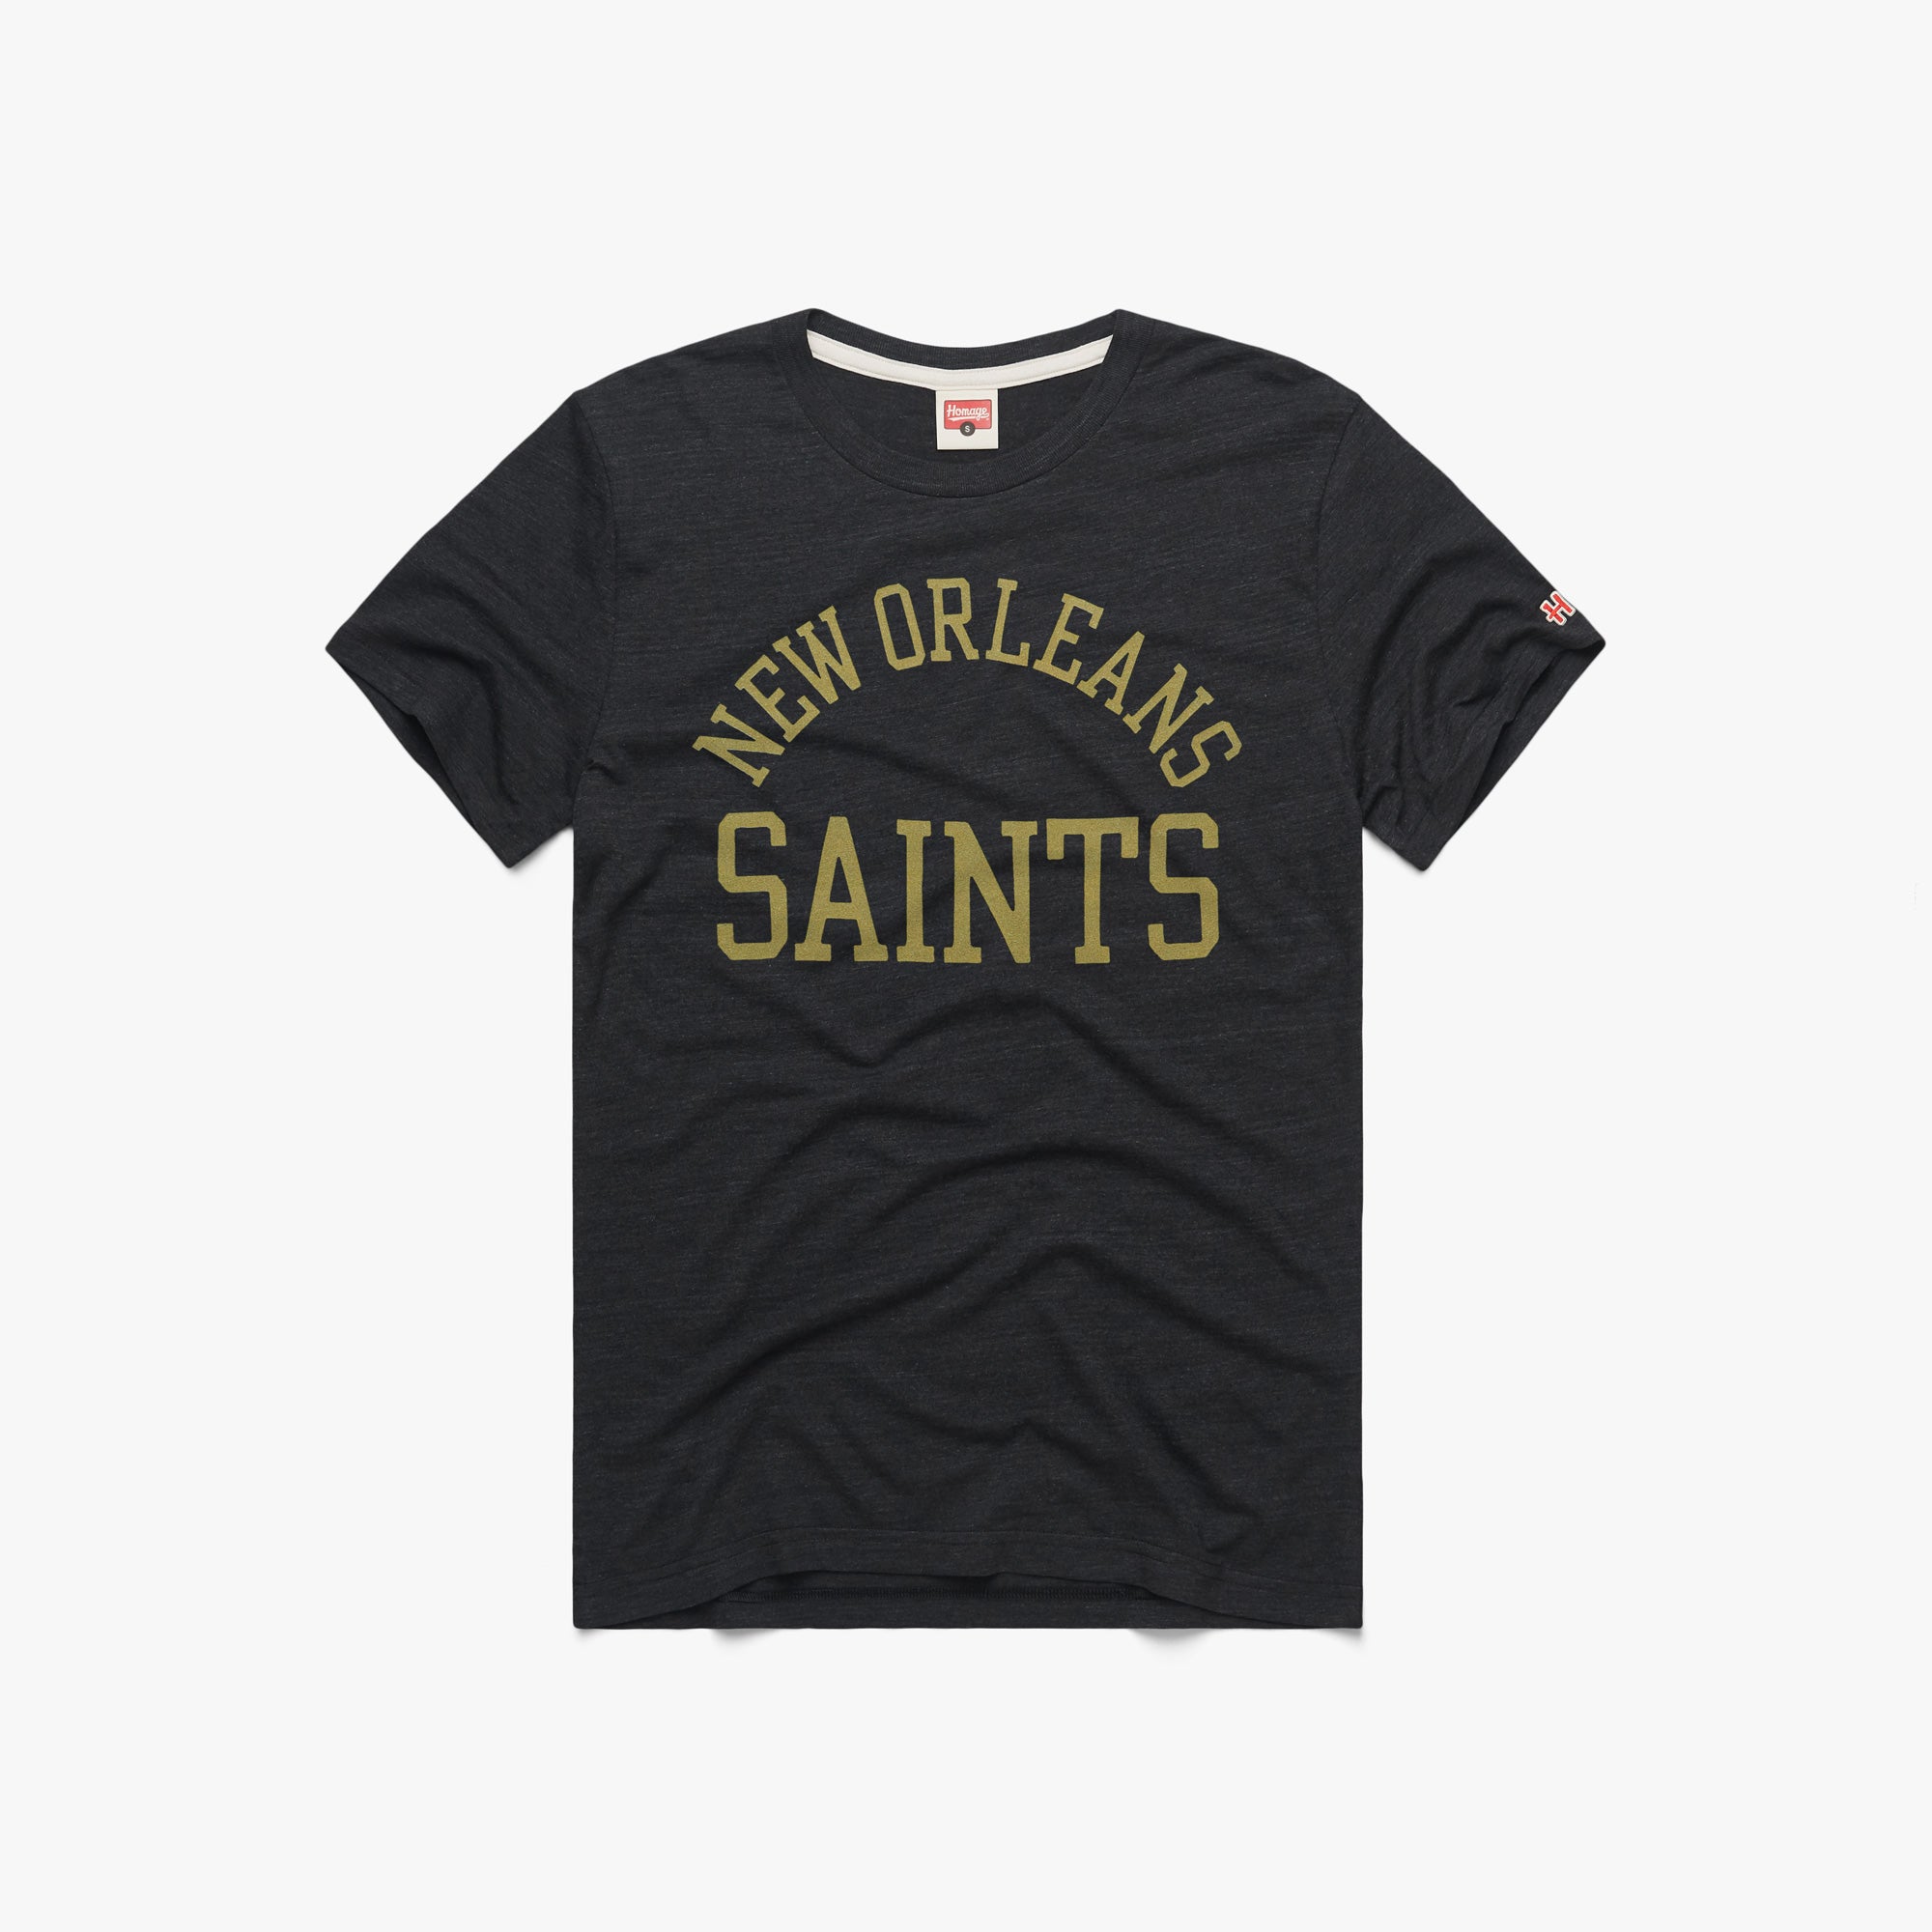 New Orleans Saints Classic T-Shirt from Homage. | Officially Licensed Vintage NFL Apparel from Homage Pro Shop.